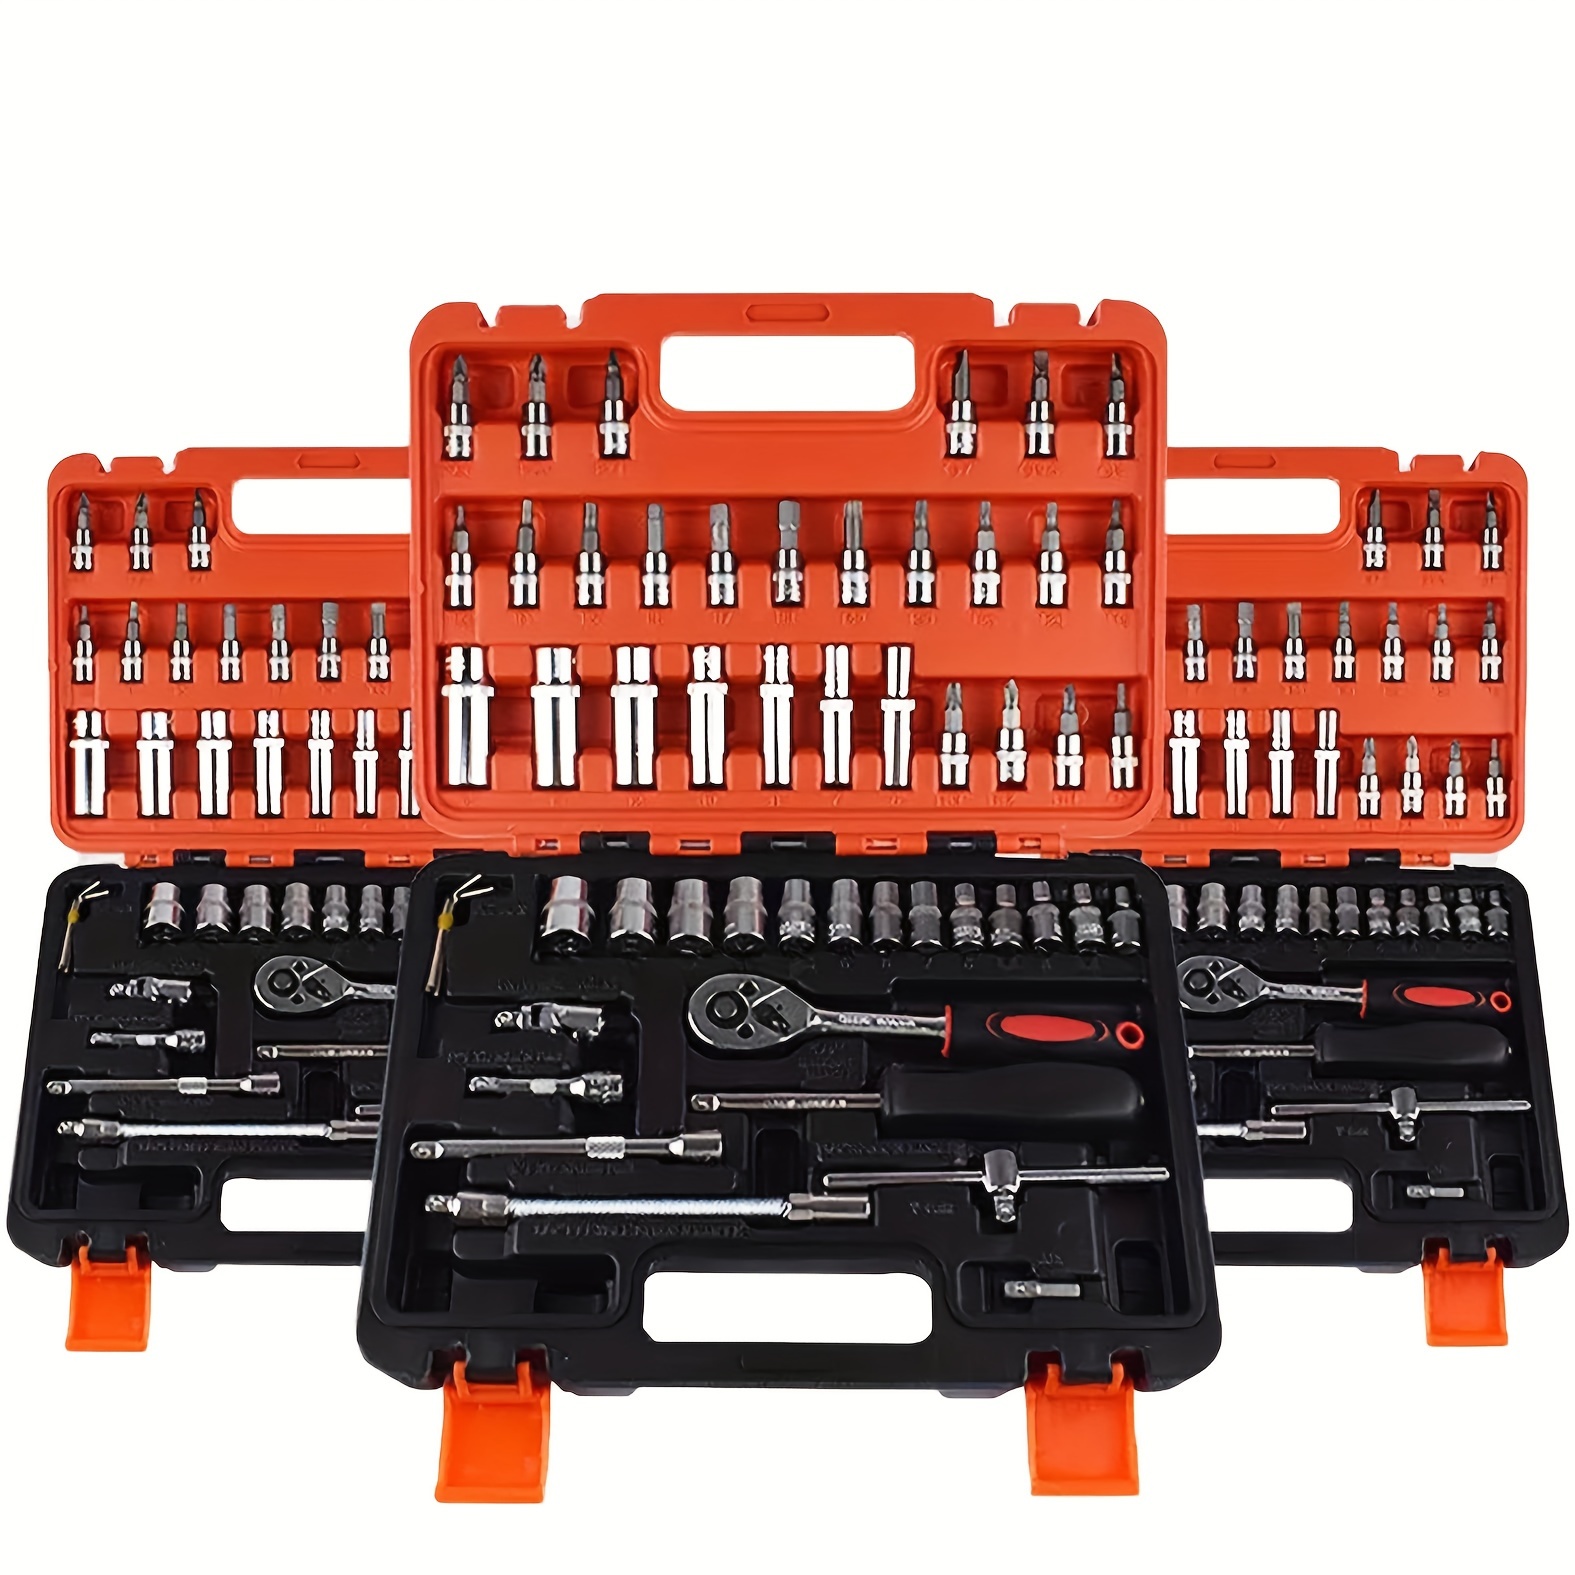 

53 Pieces Socket Wrench Set Drive Socket Set With 1/4 Inch Ratcheting Wrench Plastic Toolbox Storage Case For Automotive Repair And Home Use